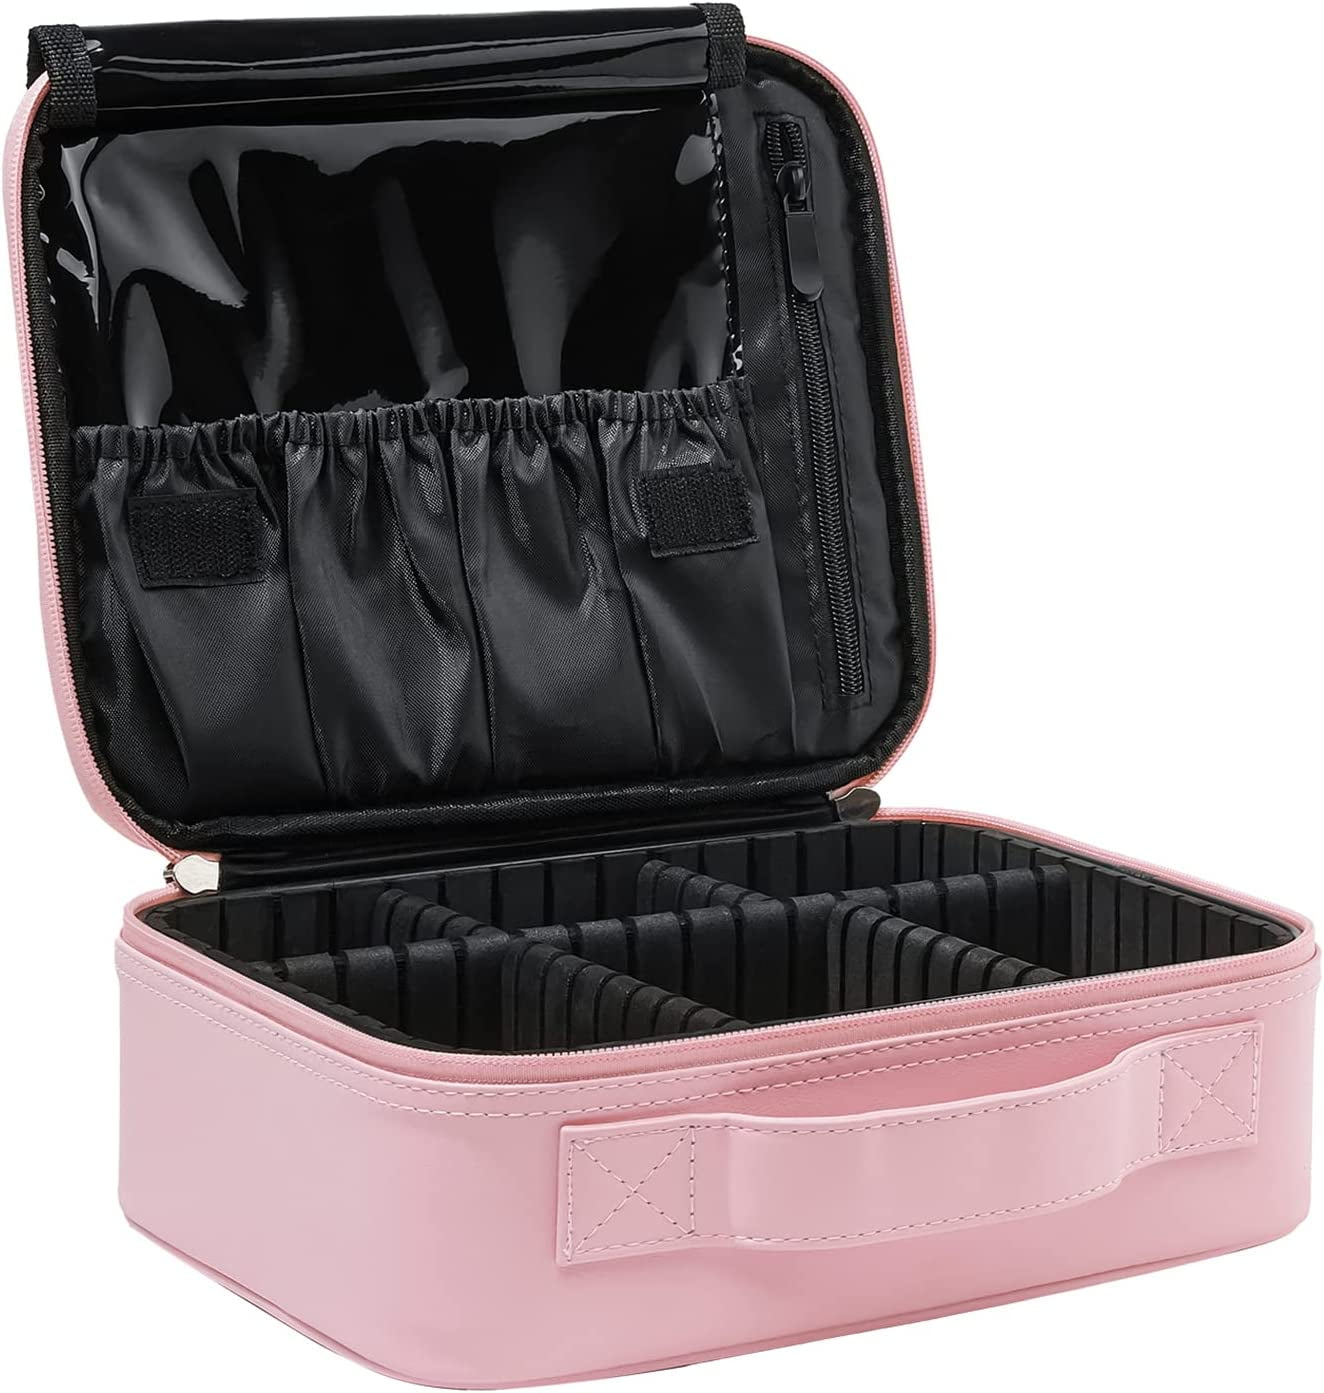 Adjustable Cosmetic Luggage Professional Portable Cosmetic Box